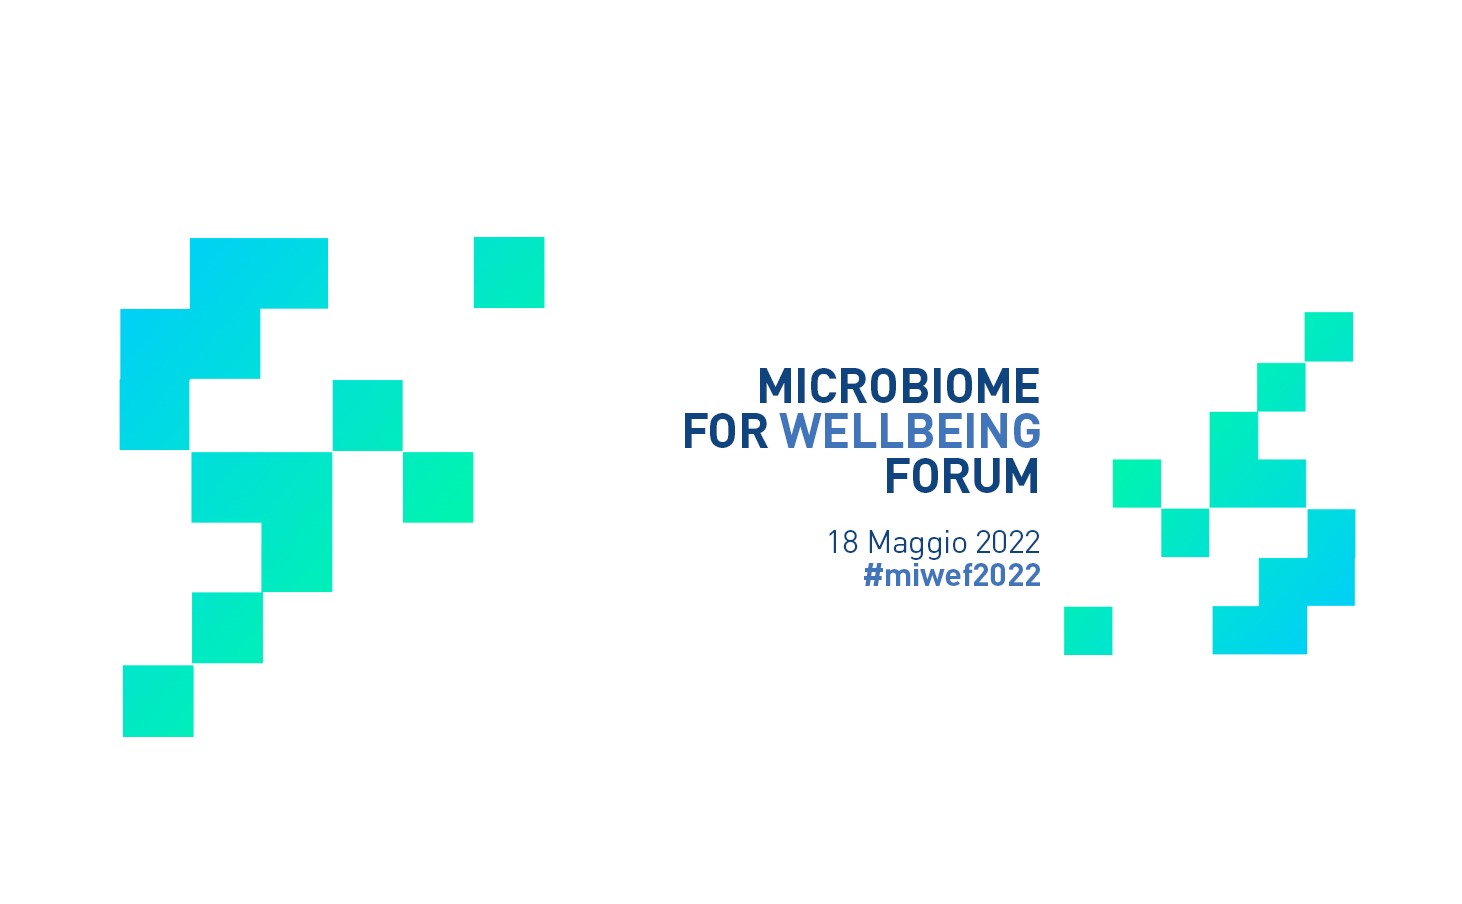 #MIWEF 2022 – MICROBIOME FOR WELLBEING FORUM 2022